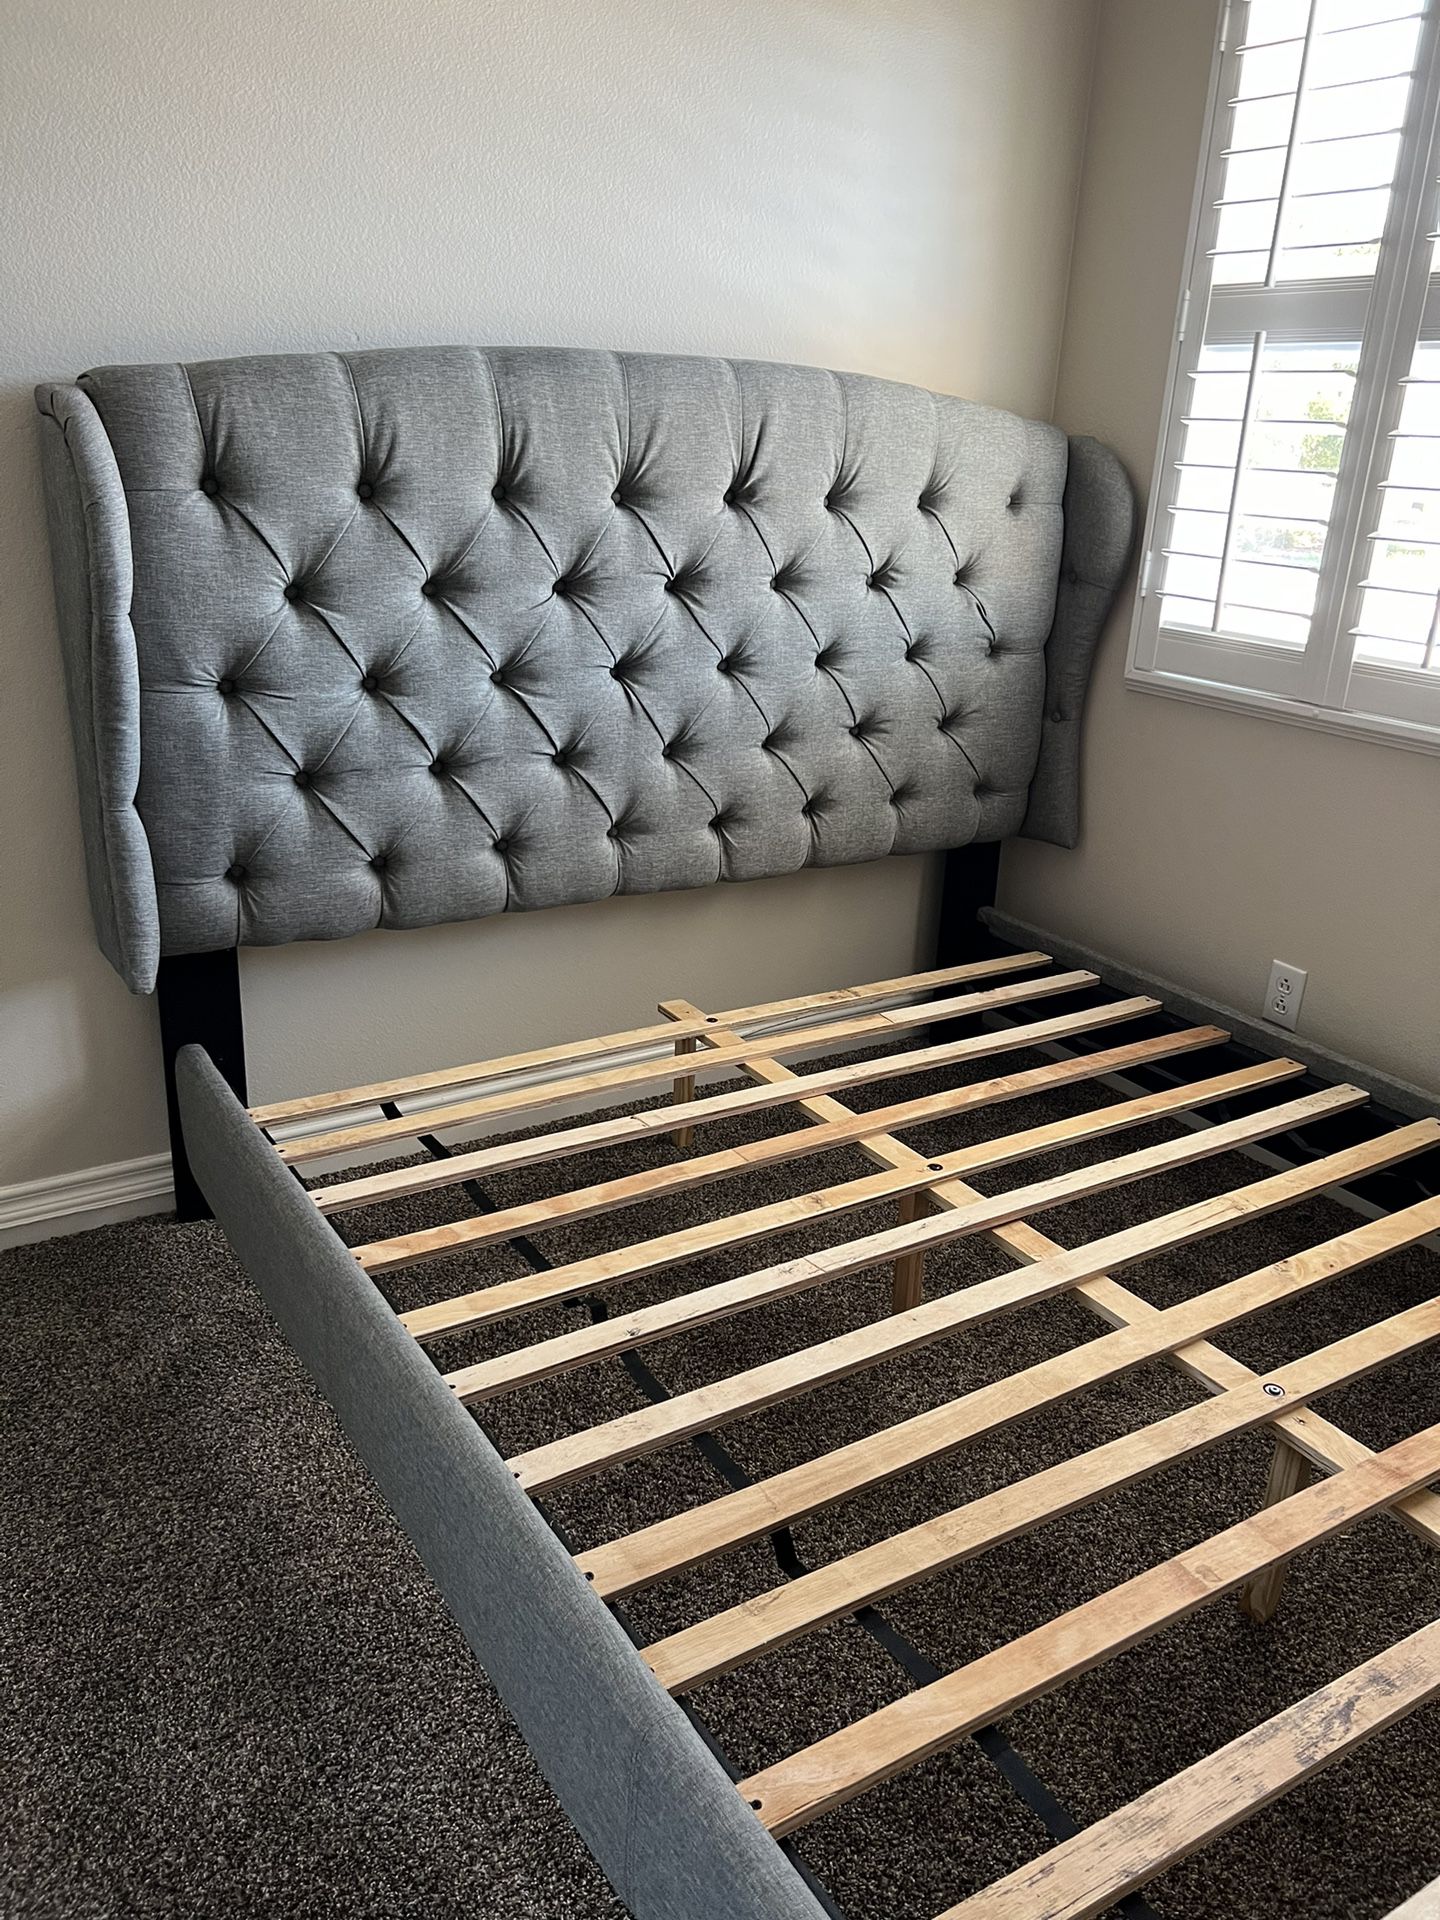 Queen Complete Bed Frame Only $300 Full Size $280